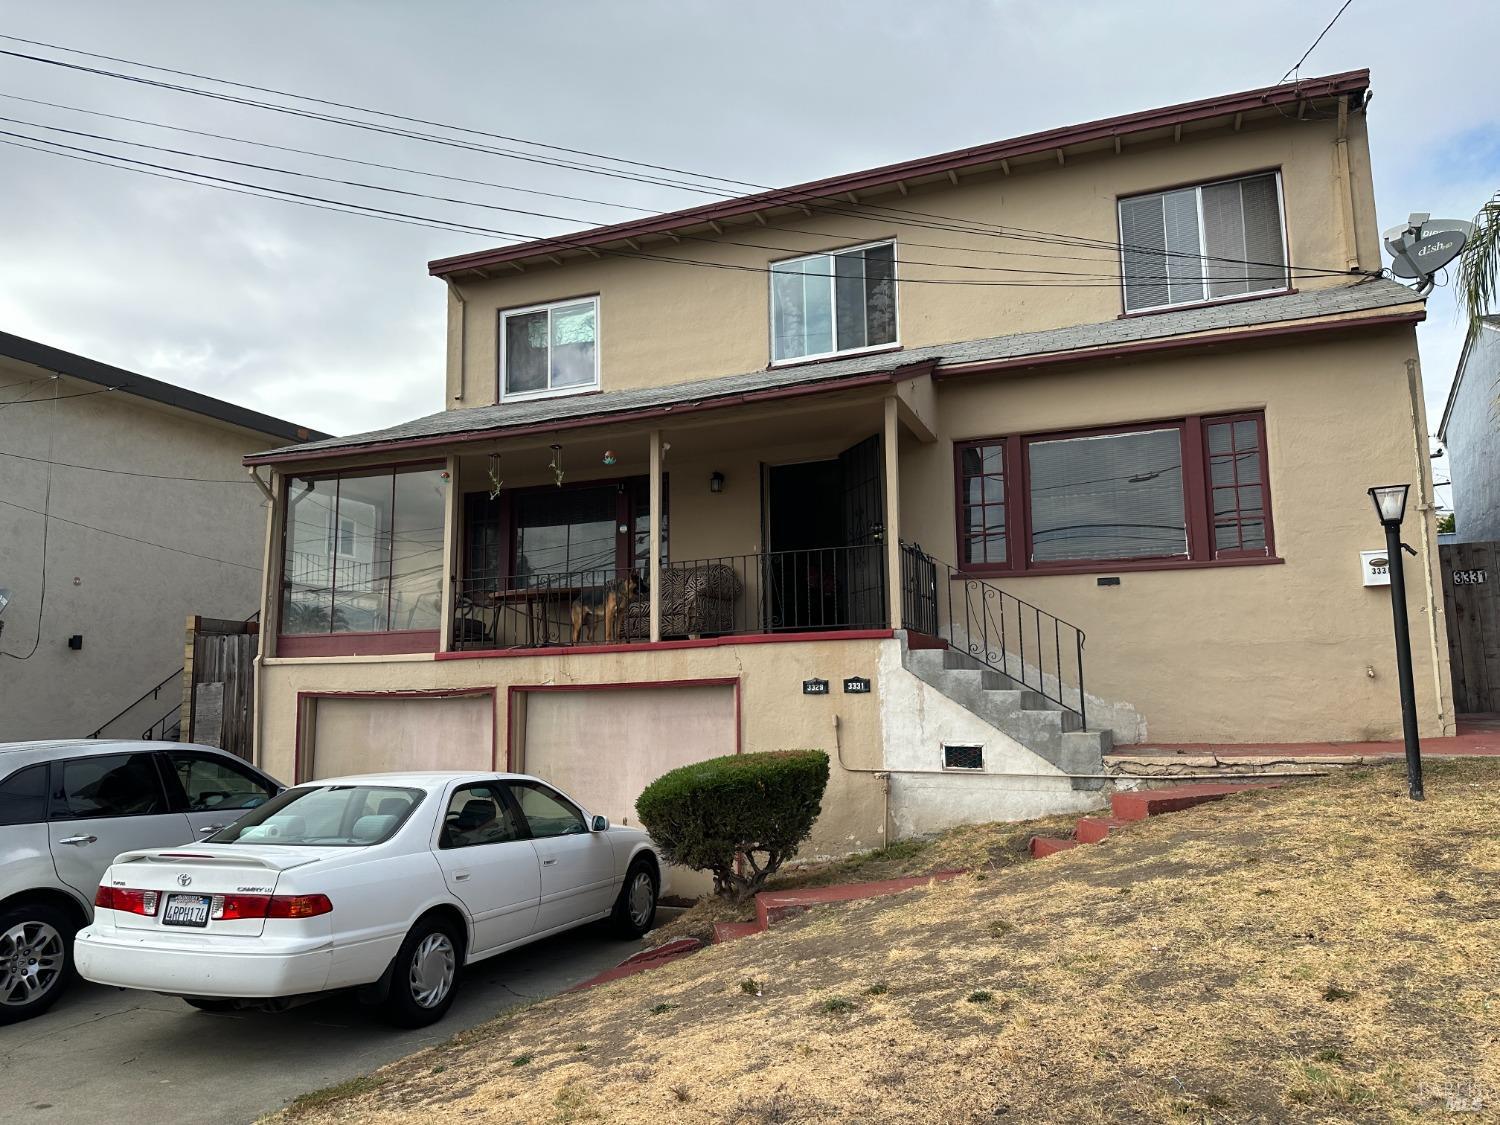 Photo of 3329-3331 64th Ave Pl in Oakland, CA